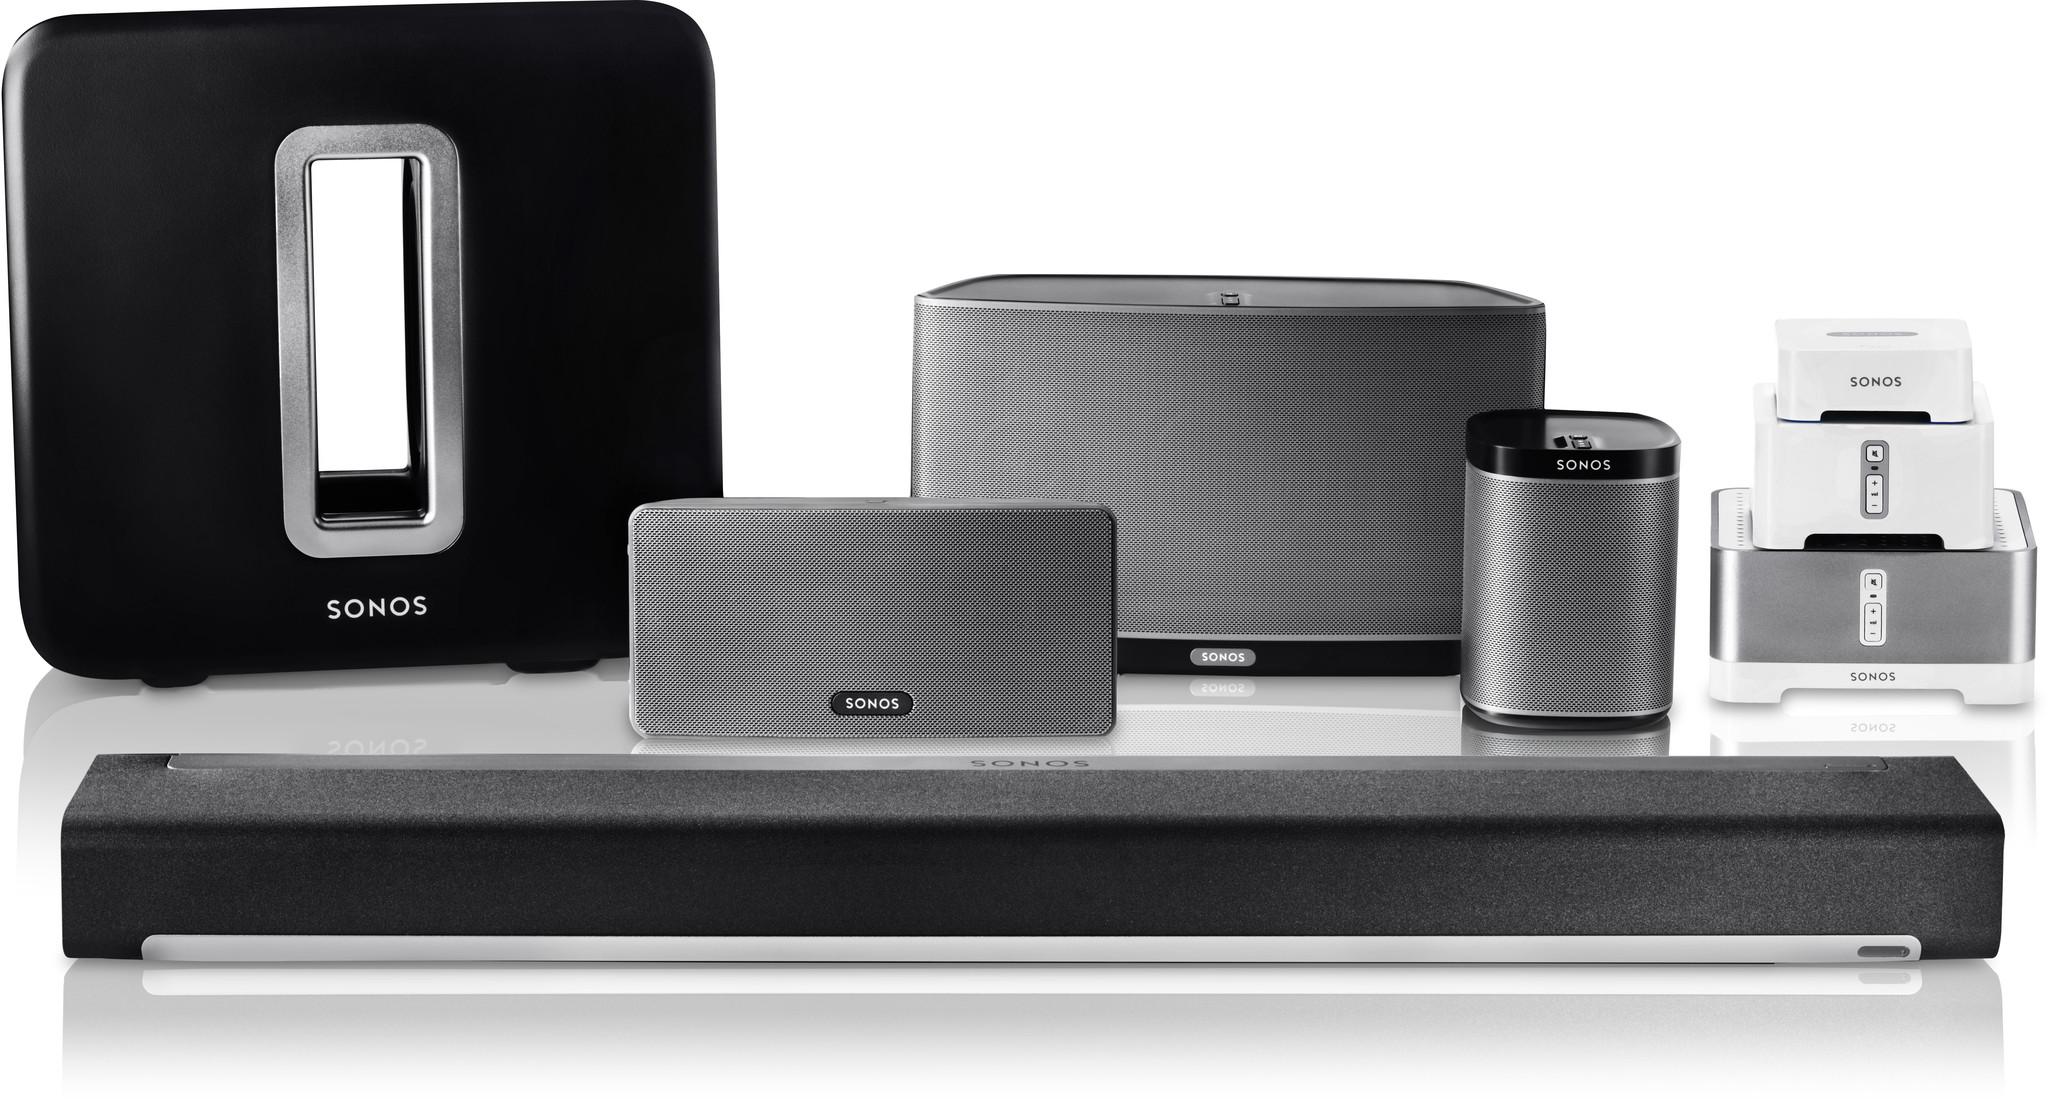 Can I use Sonos with my tablet?